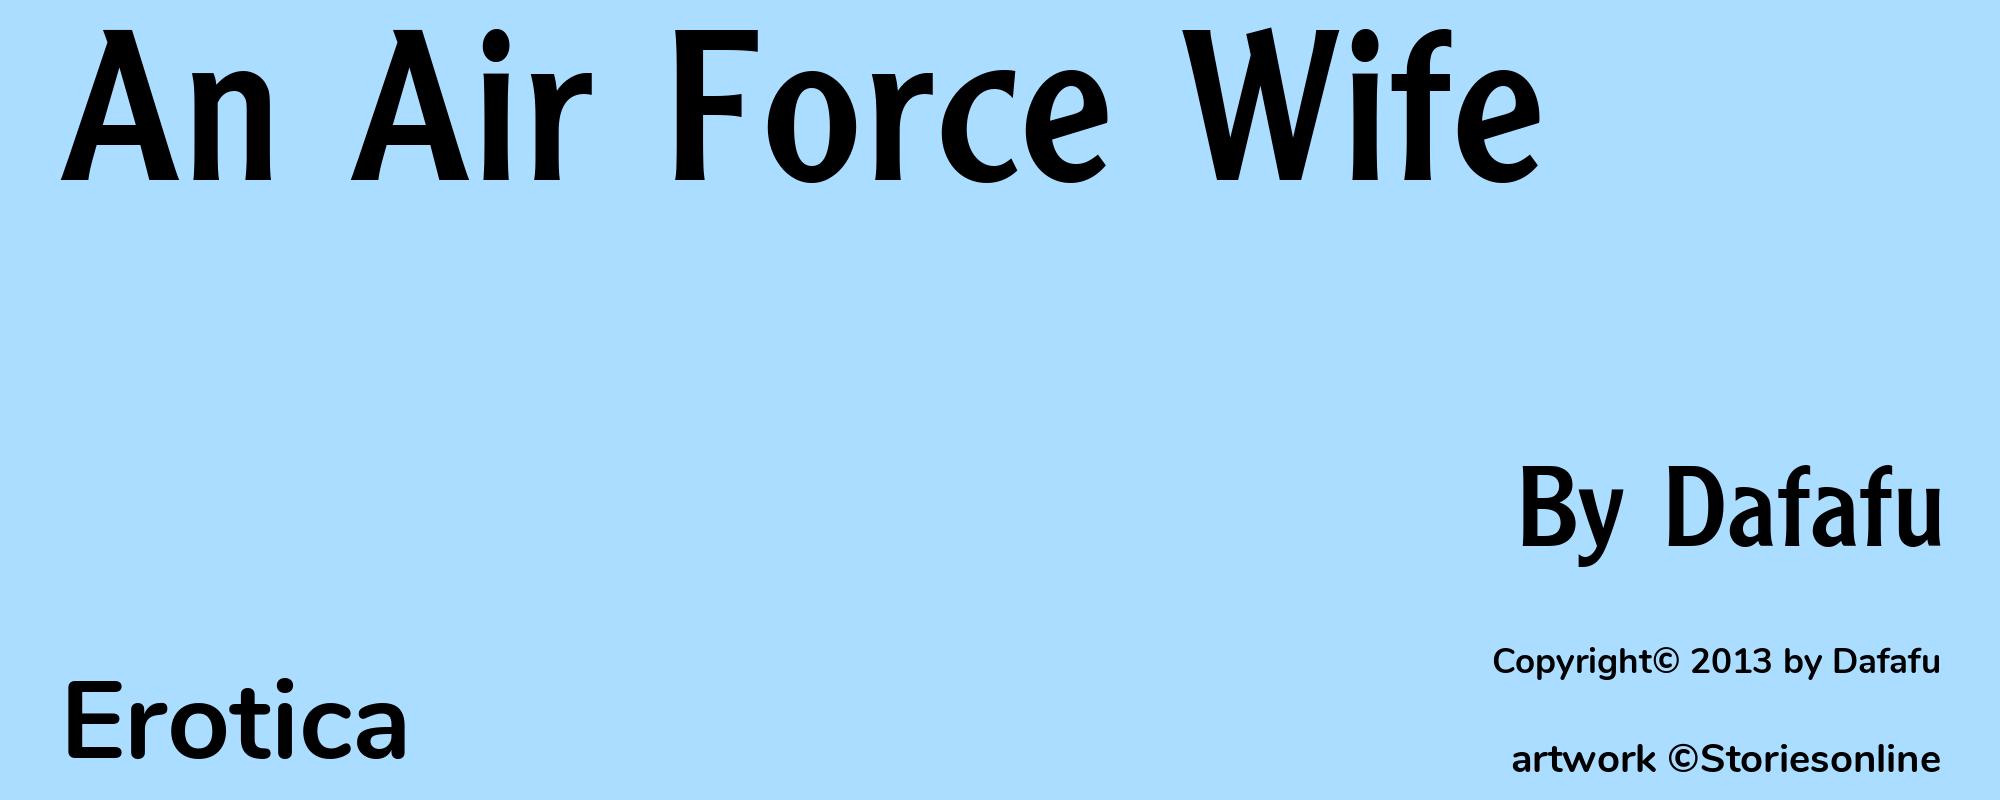 An Air Force Wife - Cover